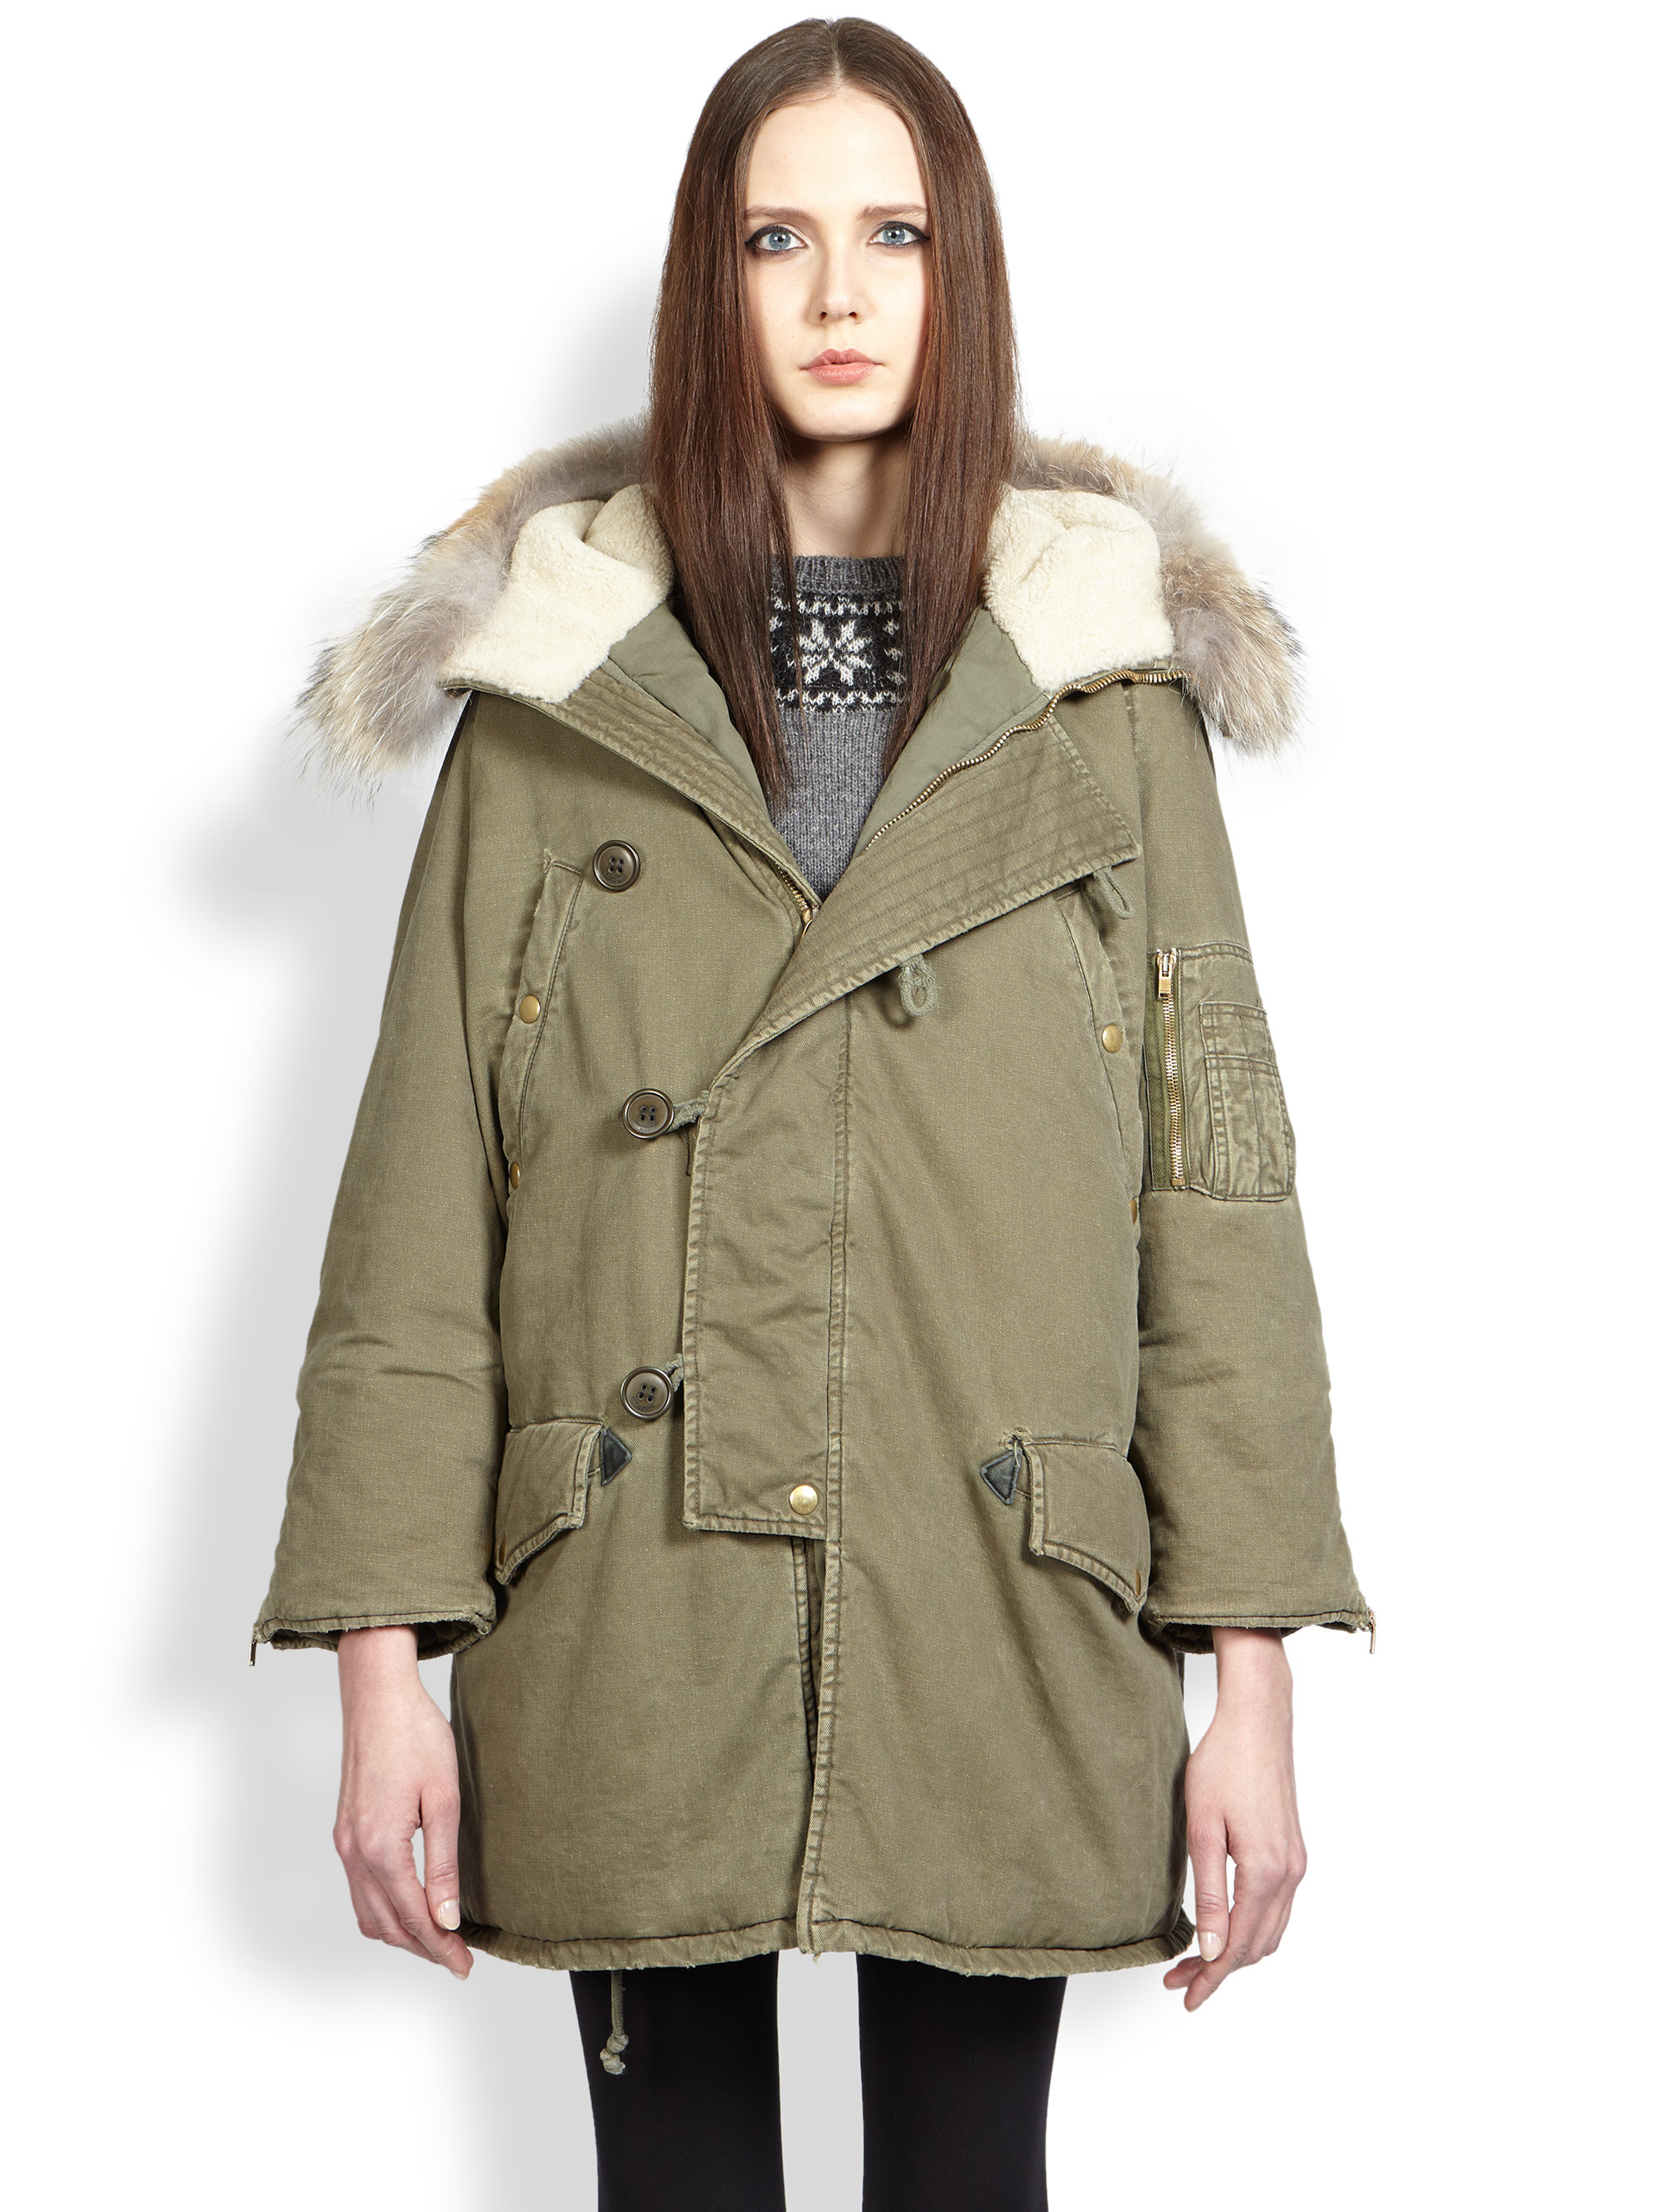 Lyst - Saint Laurent Fur-trimmed Army Parka in Green